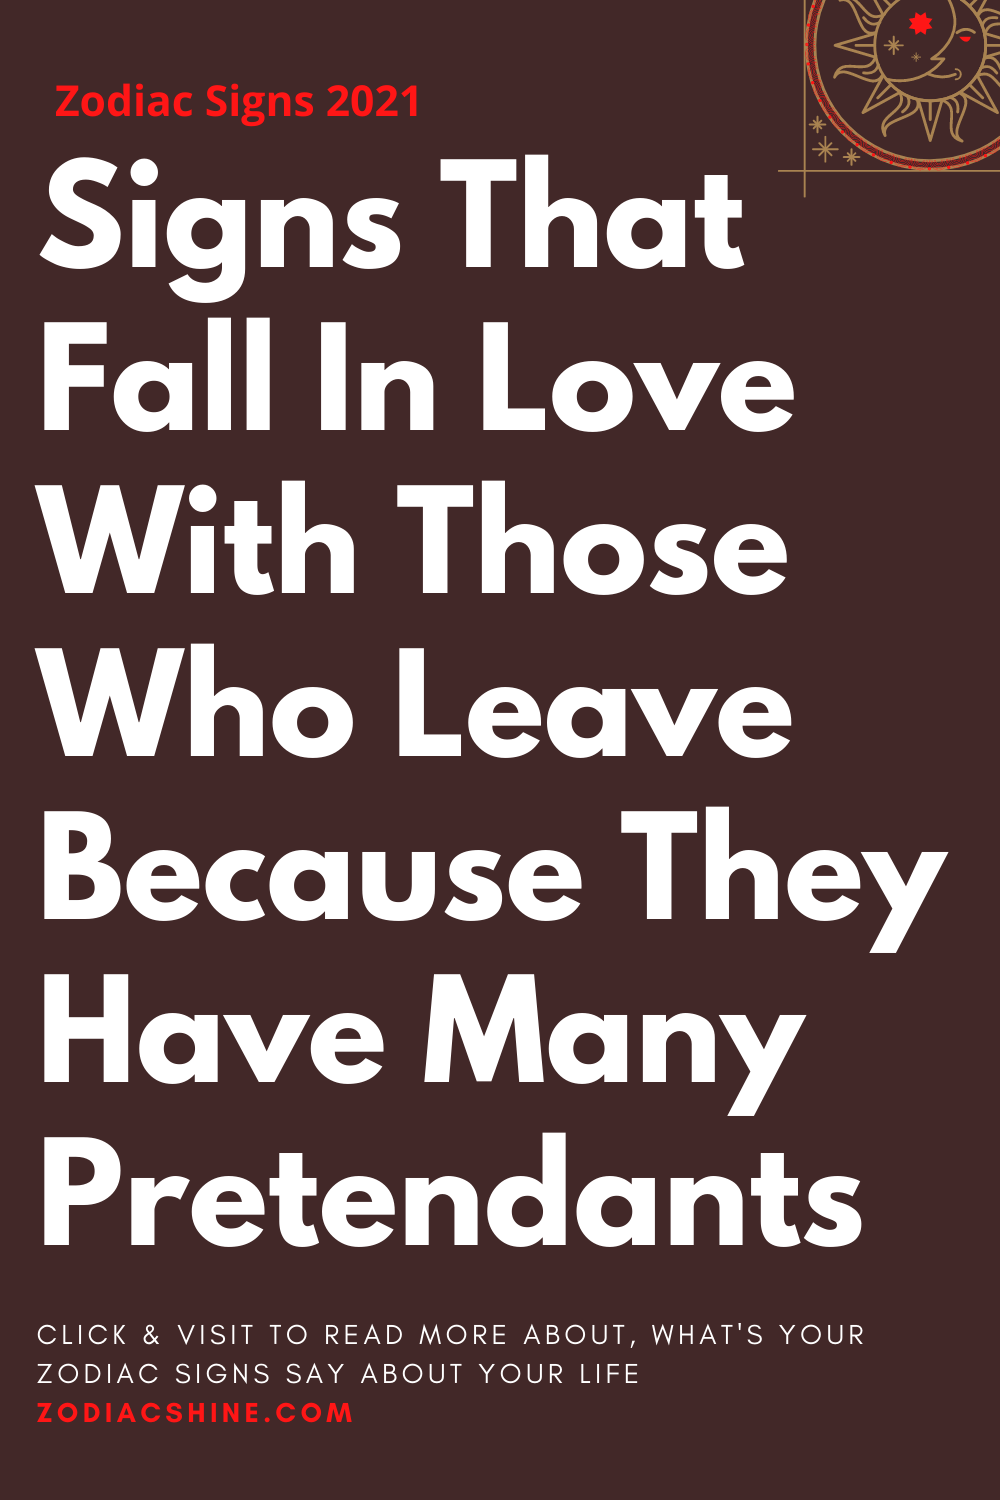 Signs That Fall In Love With Those Who Leave Because They Have Many Pretendants